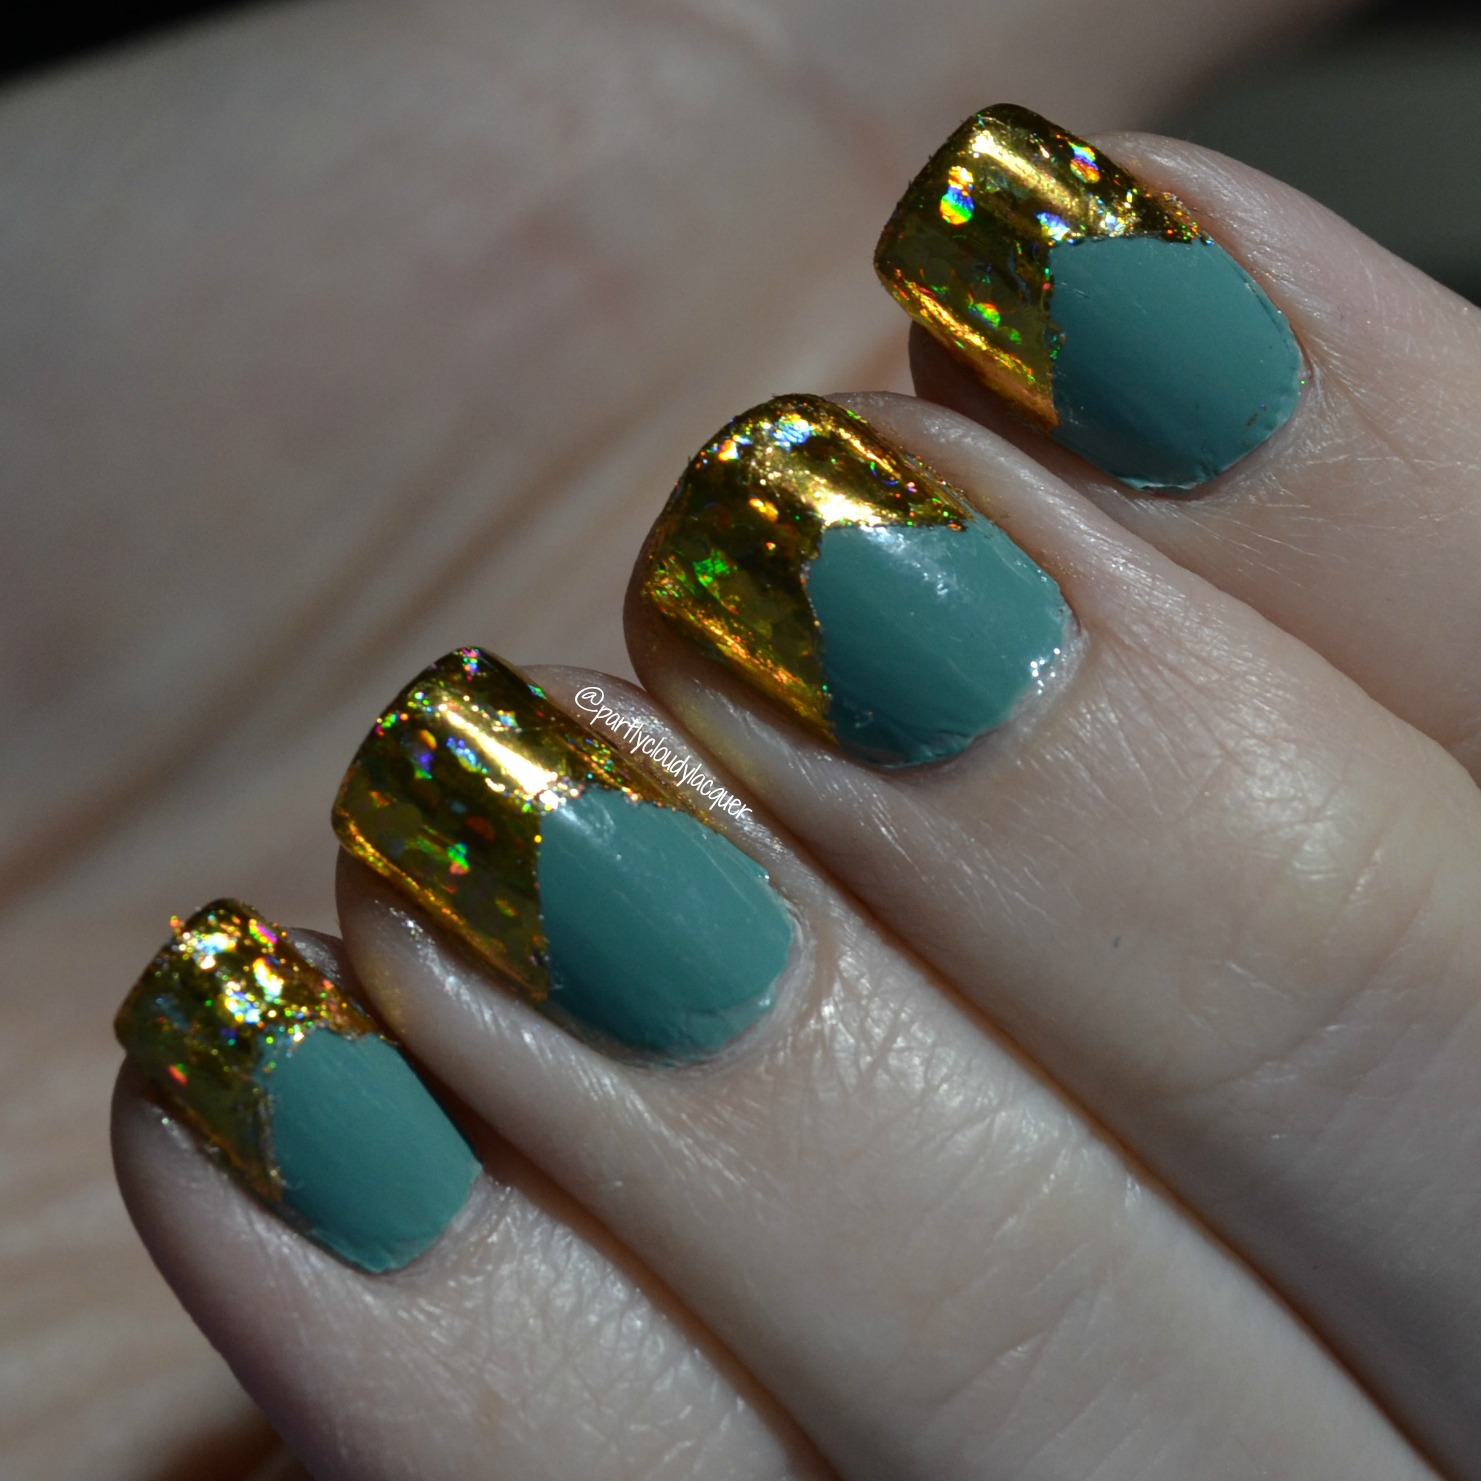 Partly Cloudy With a Chance of Lacquer: French Tip Nails using Nail Foil